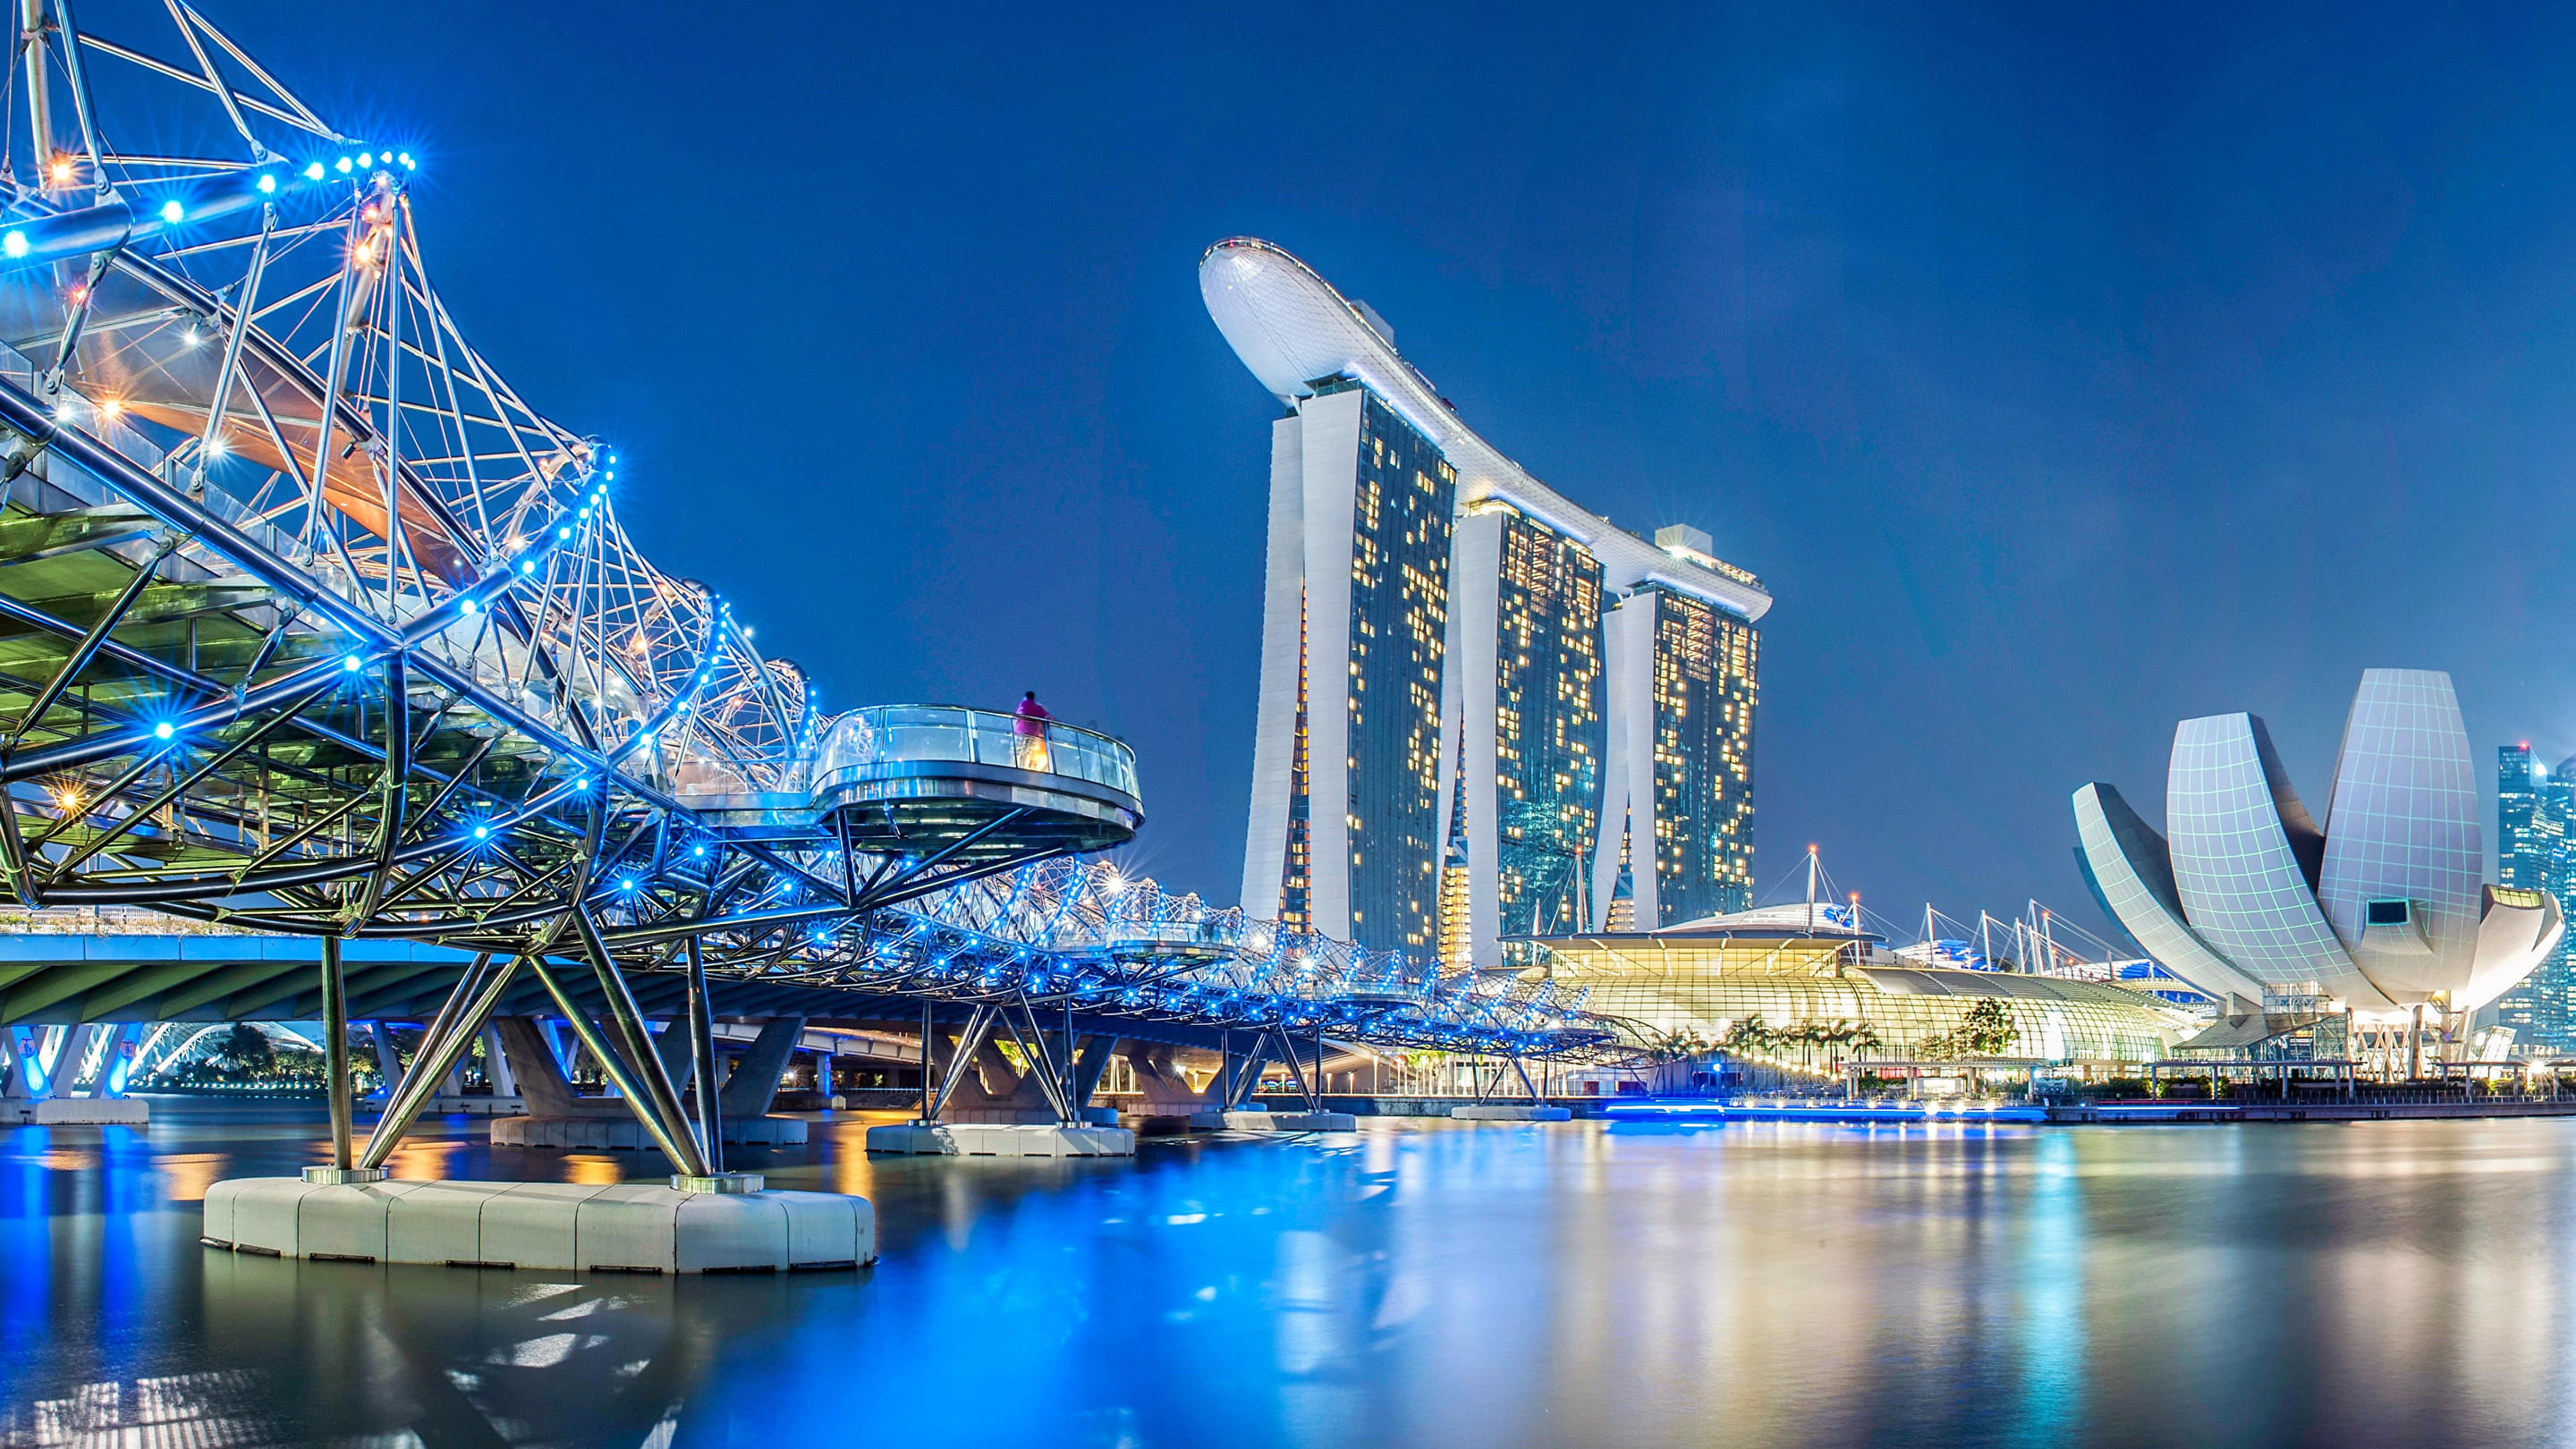 ﻿Marina Bay Sands Singapore Overview